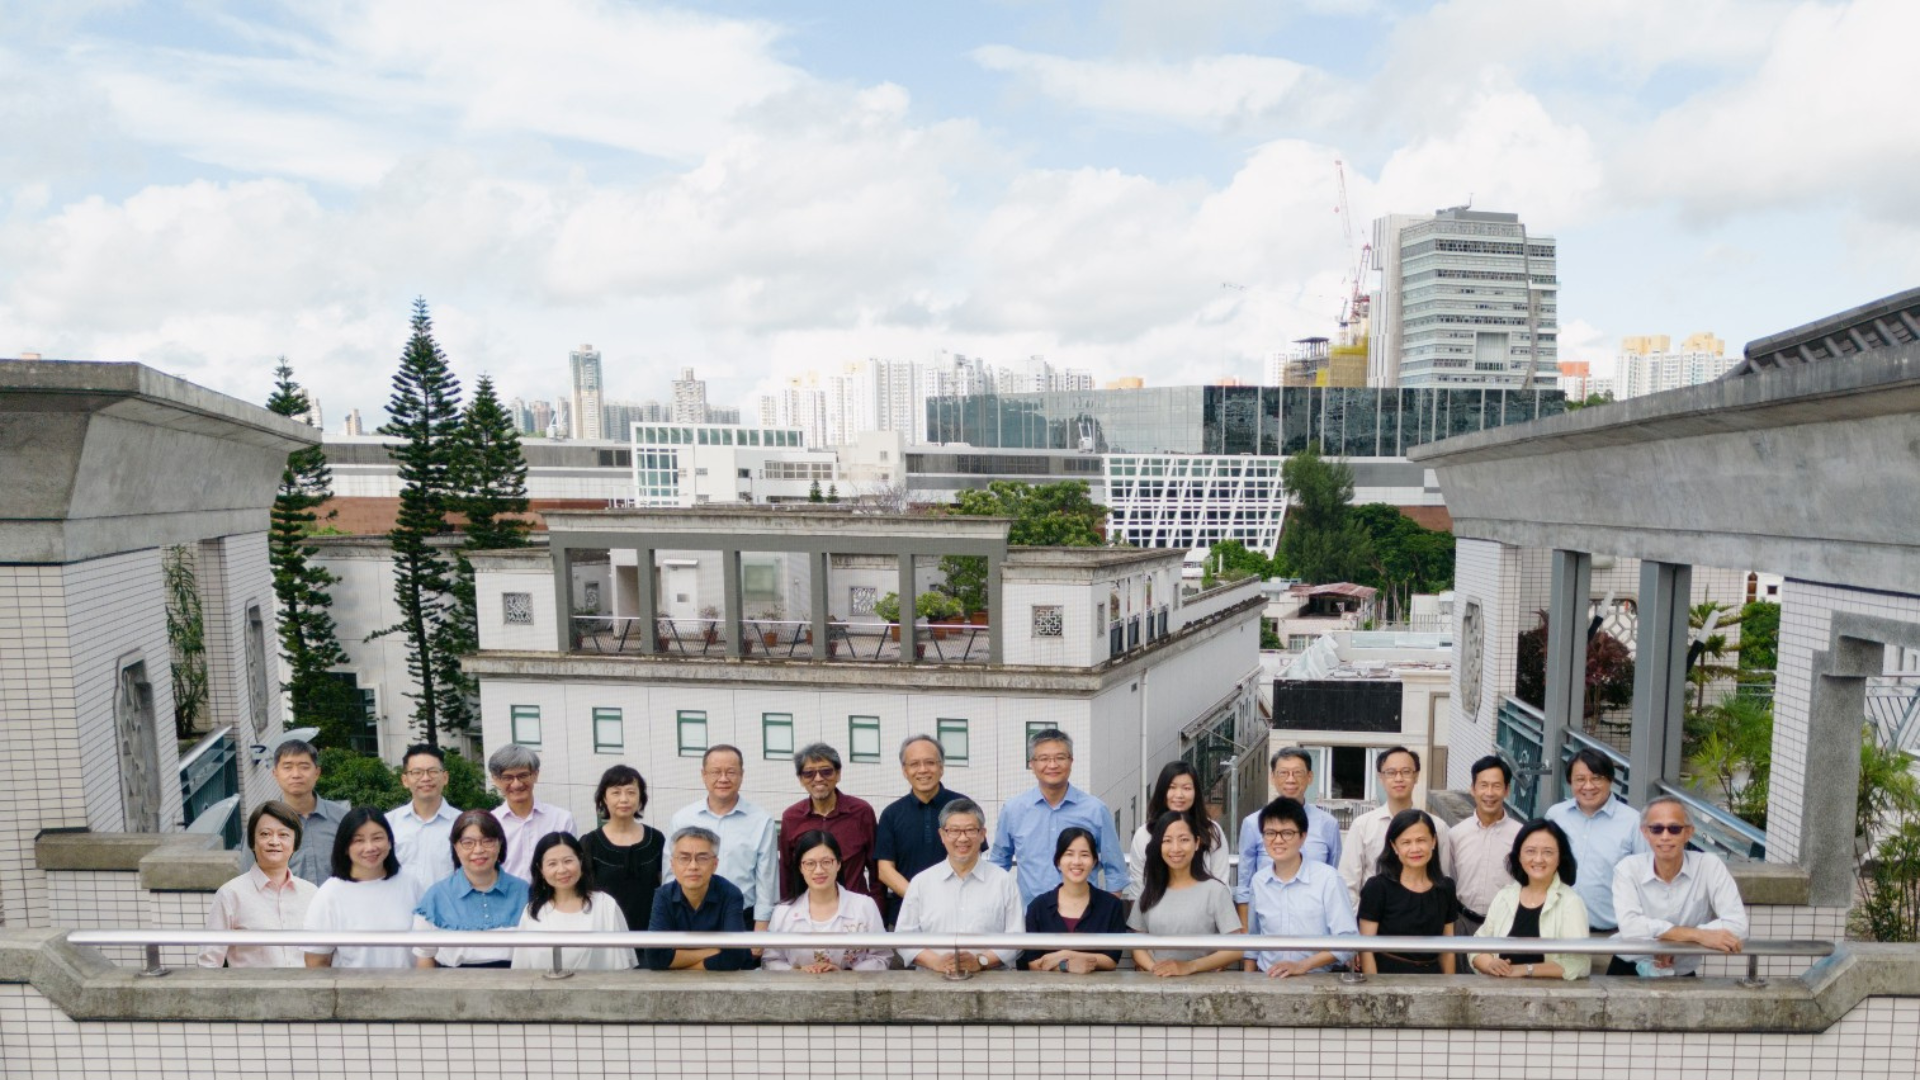 China Graduate School of Theology | Hong Kong
Developing Leaders, Multiplying Churches & Disciples
